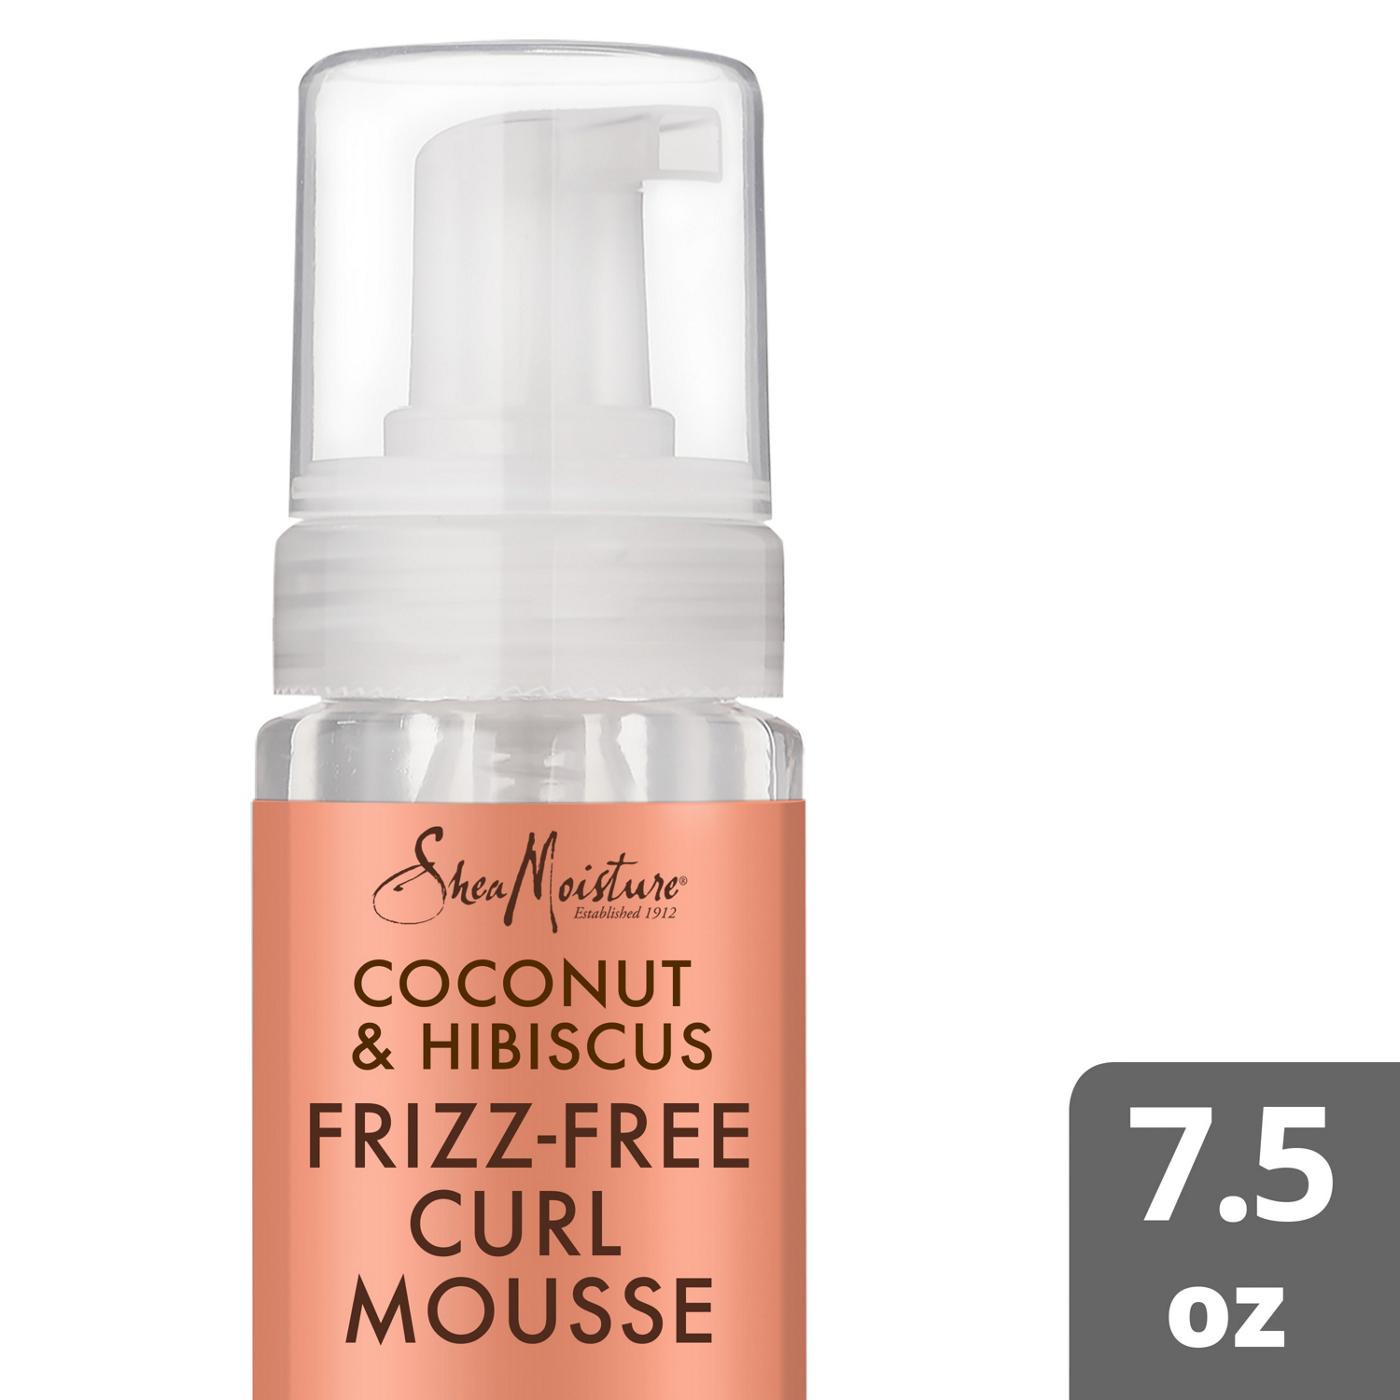 SheaMoisture Coconut & Hibiscus Frizz-Free Curl Mousse; image 4 of 11